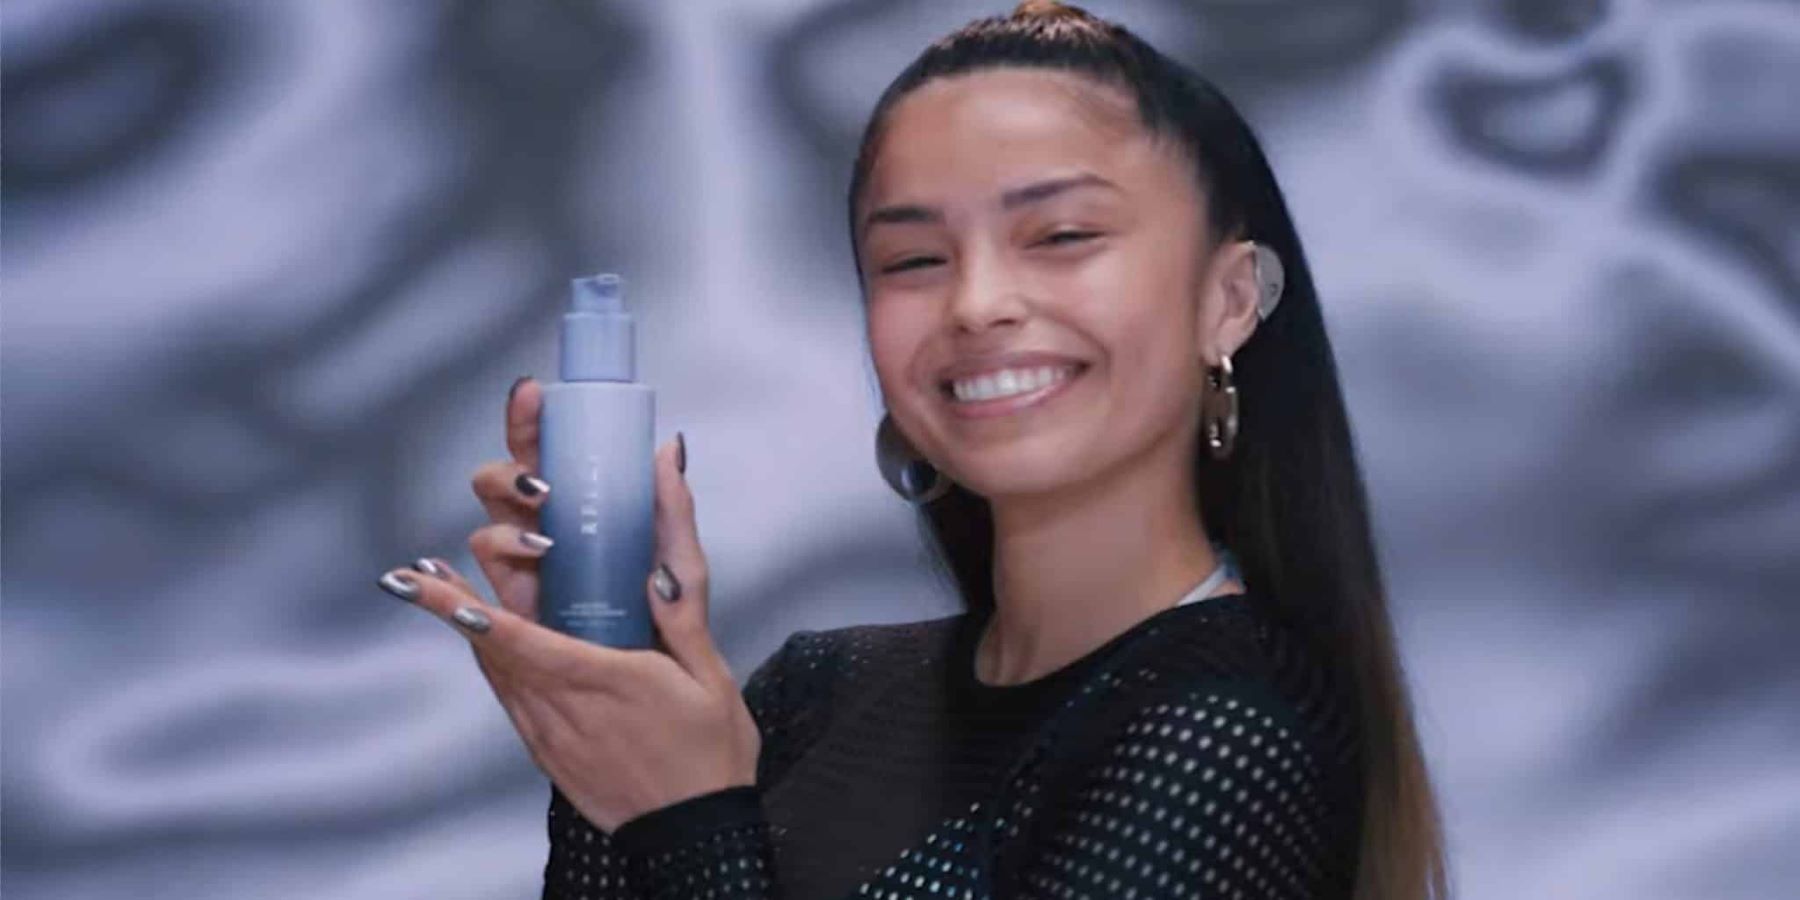 YouTube streamer Valkyrae holding up a bottle of RFLCT skin care product in a promotional image